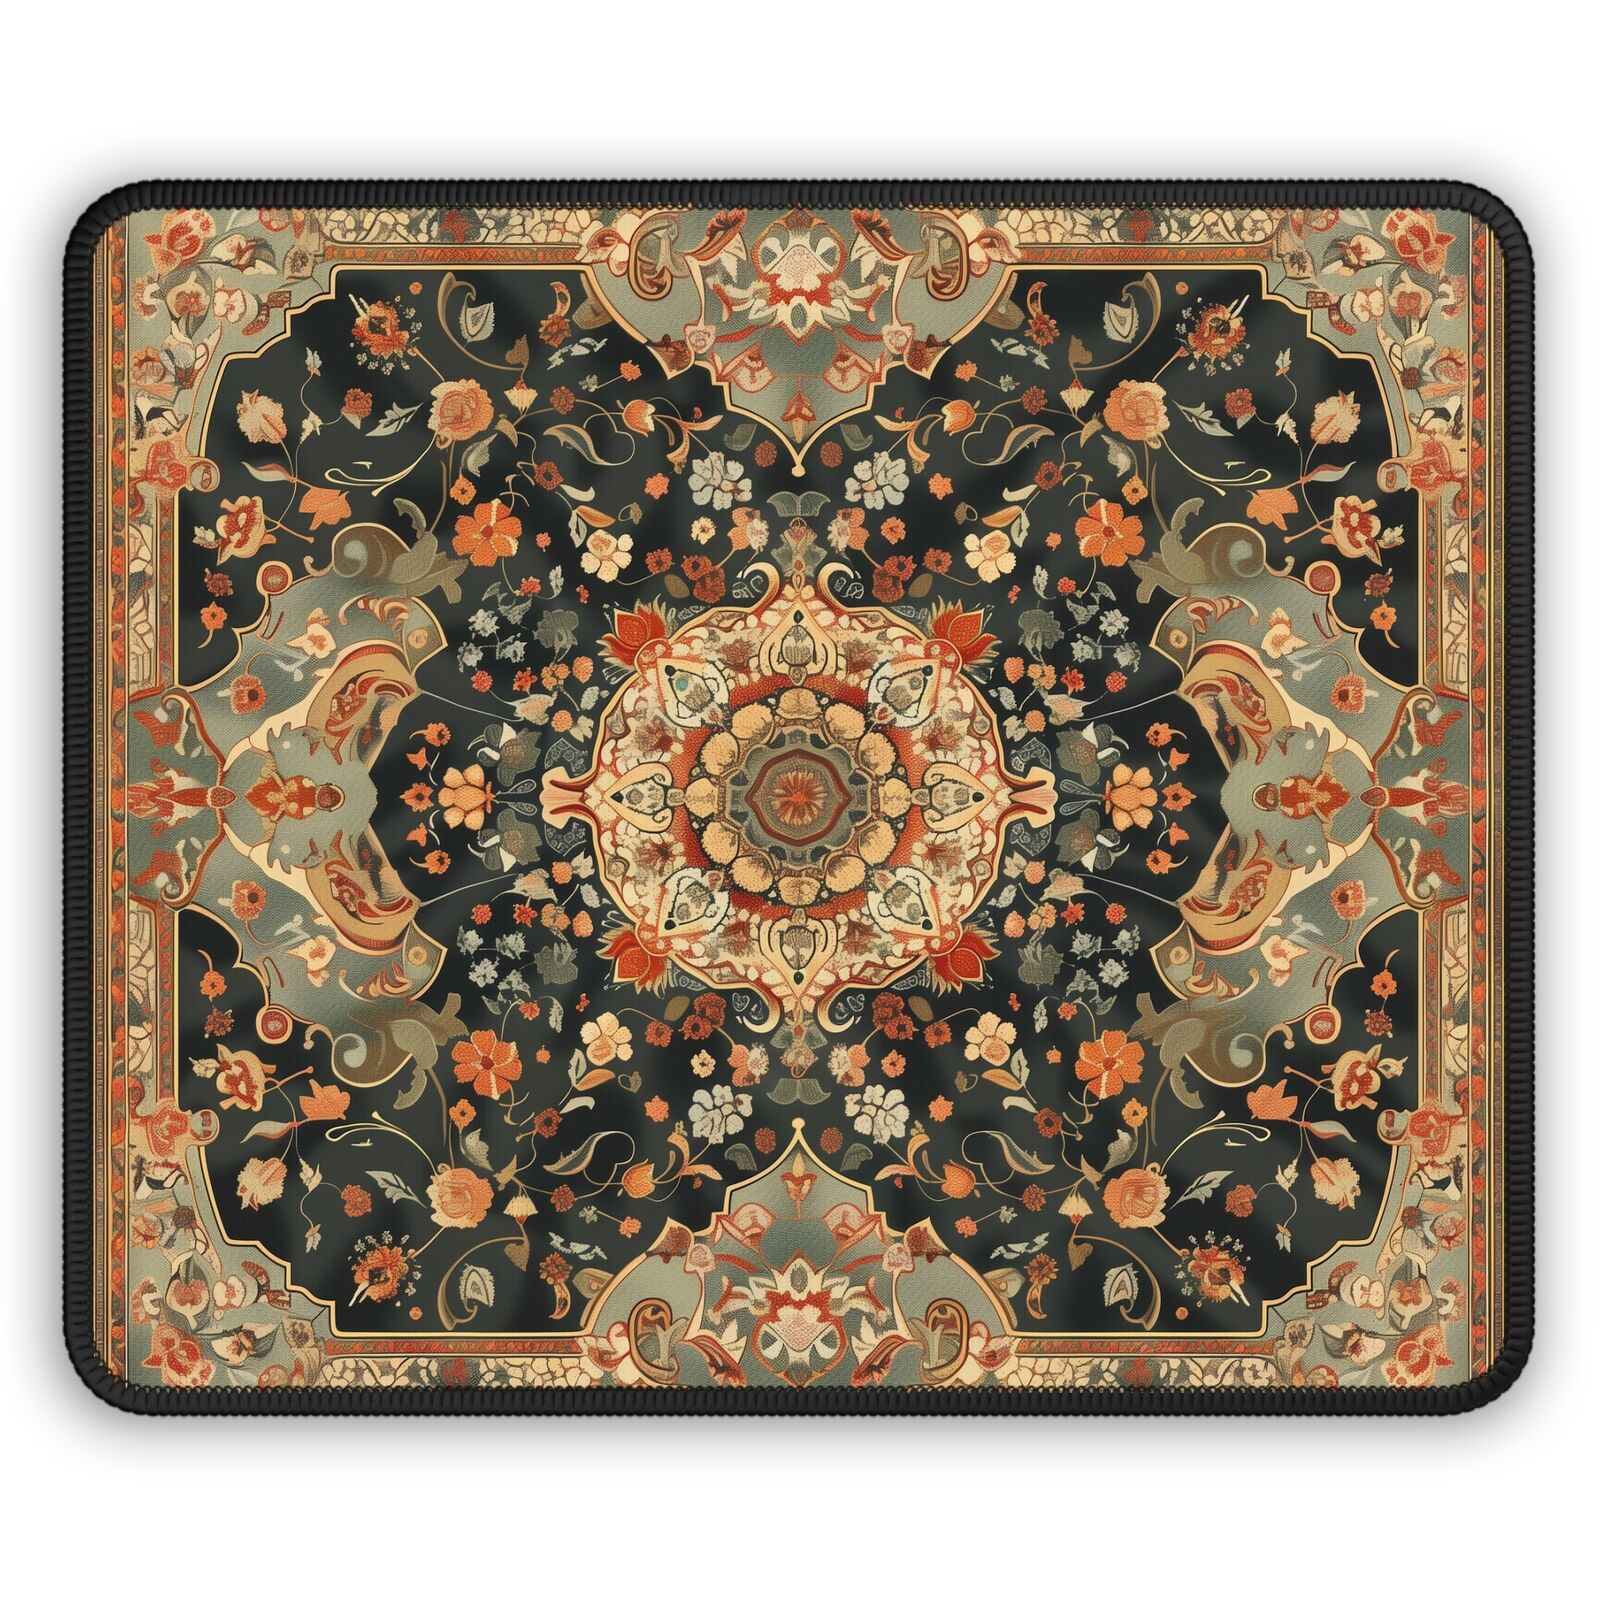 Beautiful Detailed Persian Rug Design - Perfect Gift - Premium Quality Mouse Pad